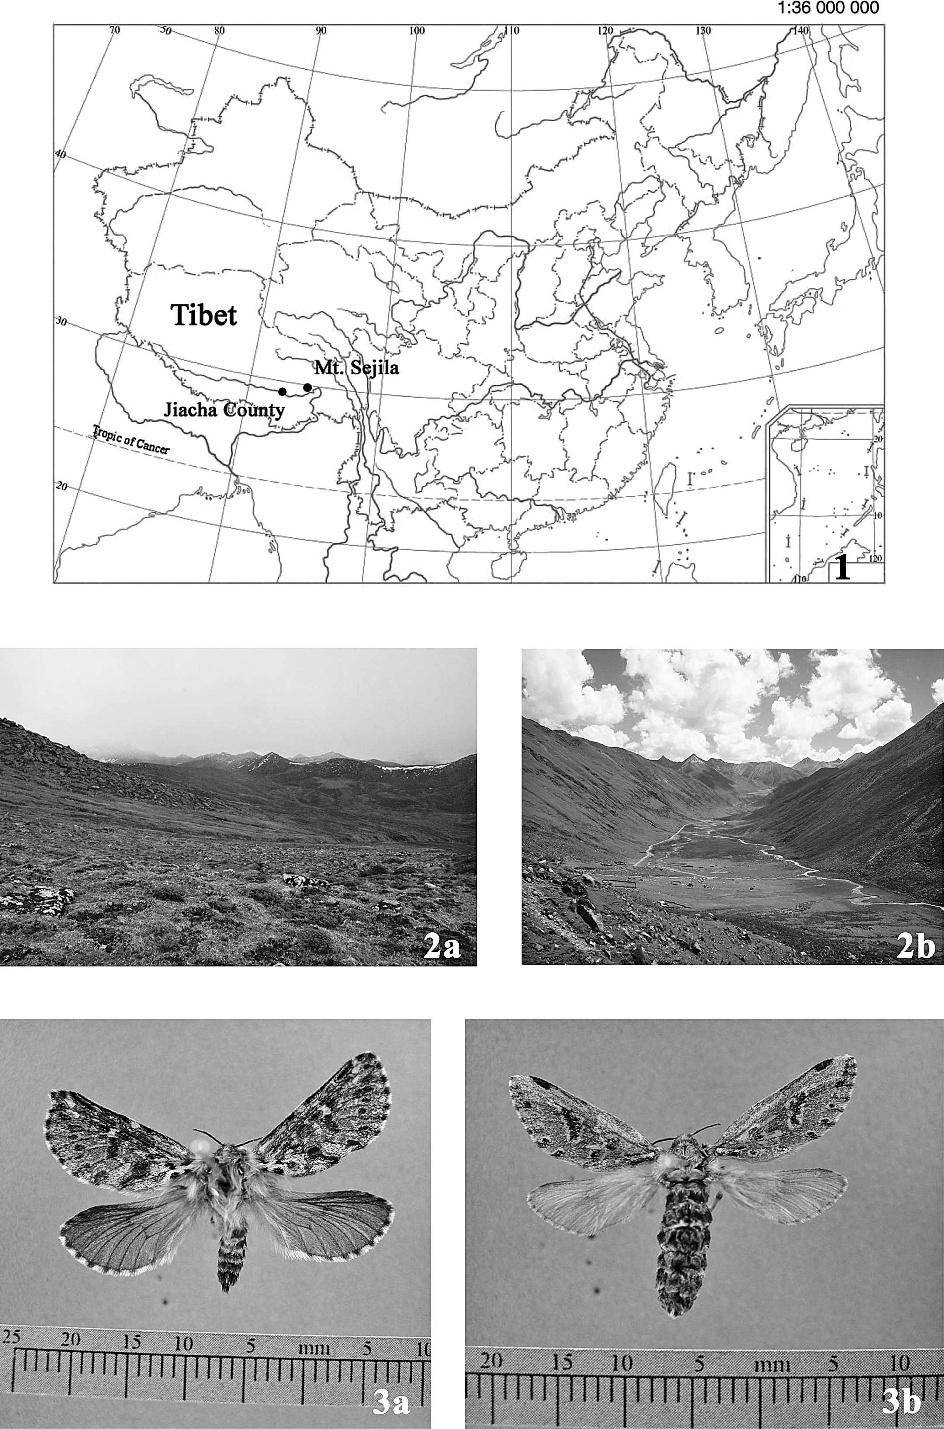 108 THE PAN-PACIFIC ENTOMOLOGIST Vol. 87(2) Figures 1 3. Figure 1. Locations of Mt. Sejila and Jiacha Counties. Figure 2.